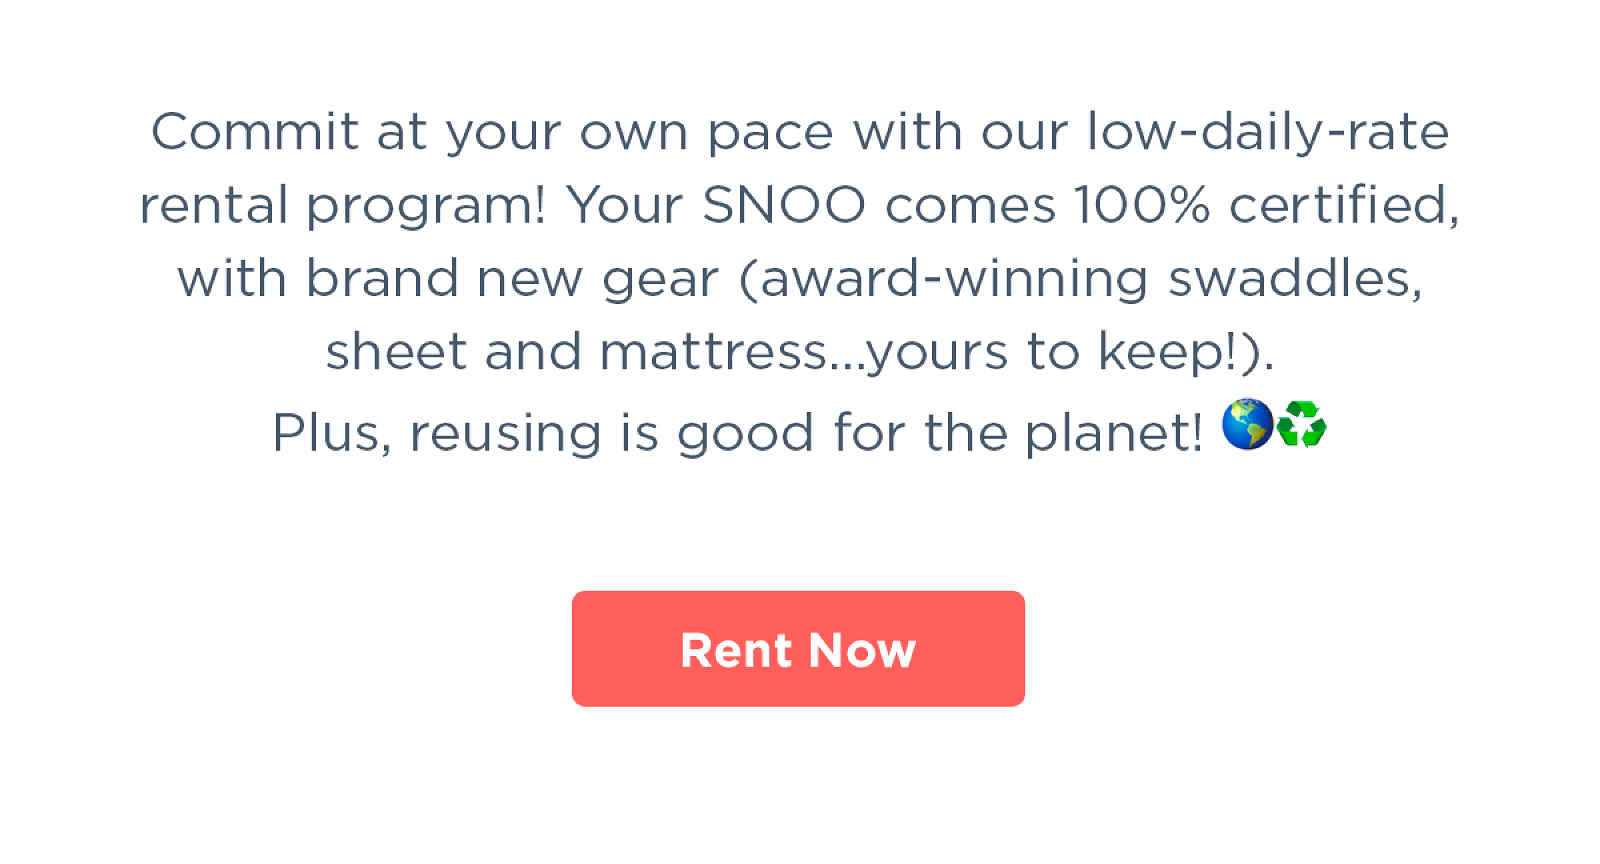 Commit at your own pace with our low-daily-rate rental program! Your SNOO comes 100% certified, with brand new gear (award-winning swaddles, sheet and mattress...yours to keep!). Plus, reusing is good for the planet!